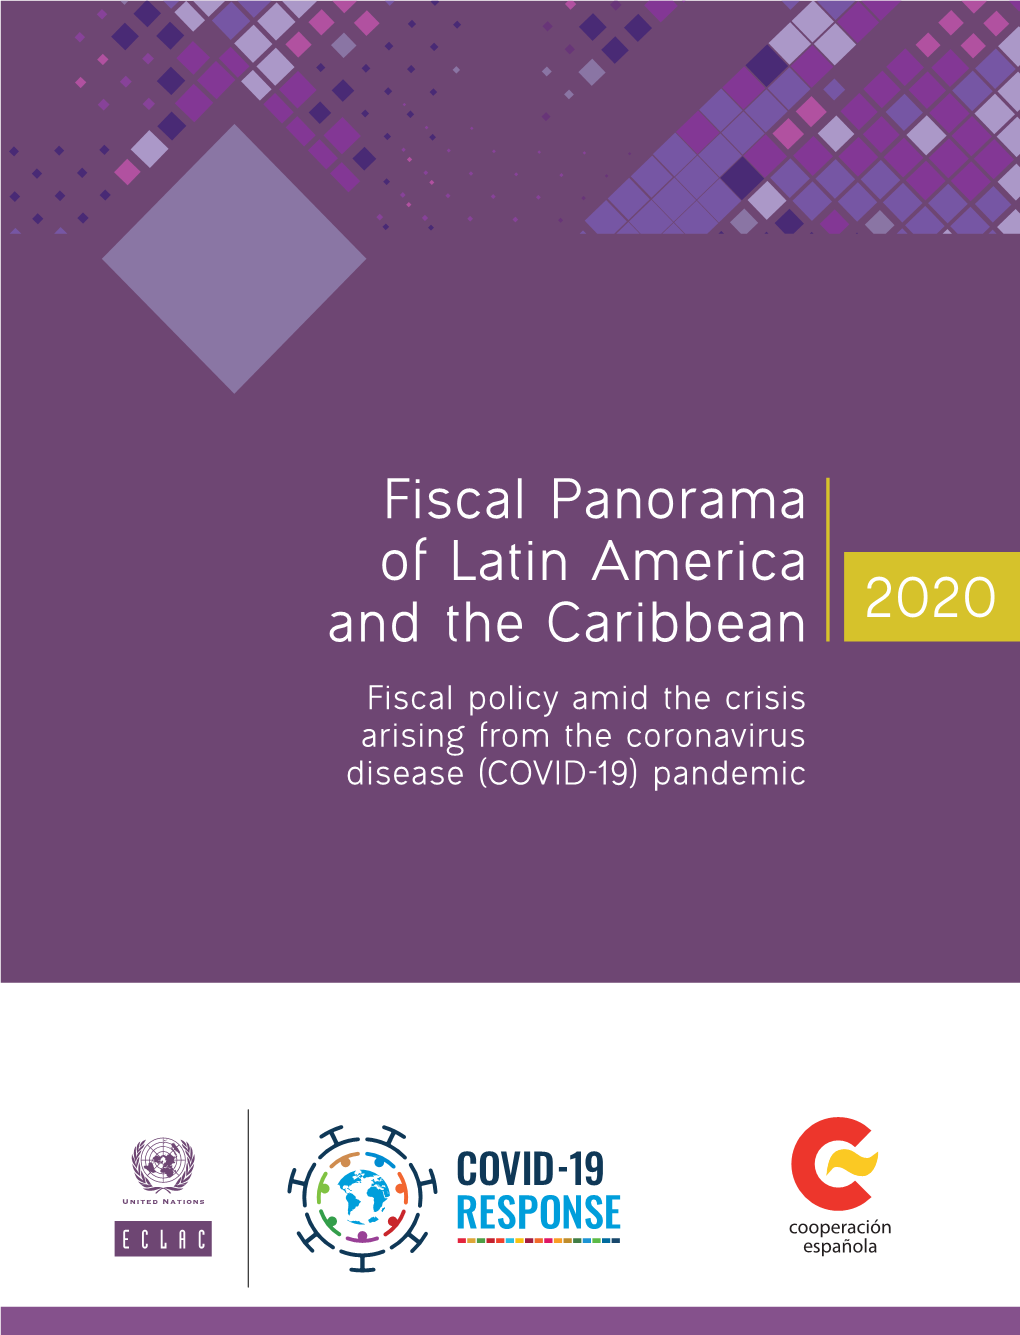 2020 Fiscal Panorama of Latin America and the Caribbean